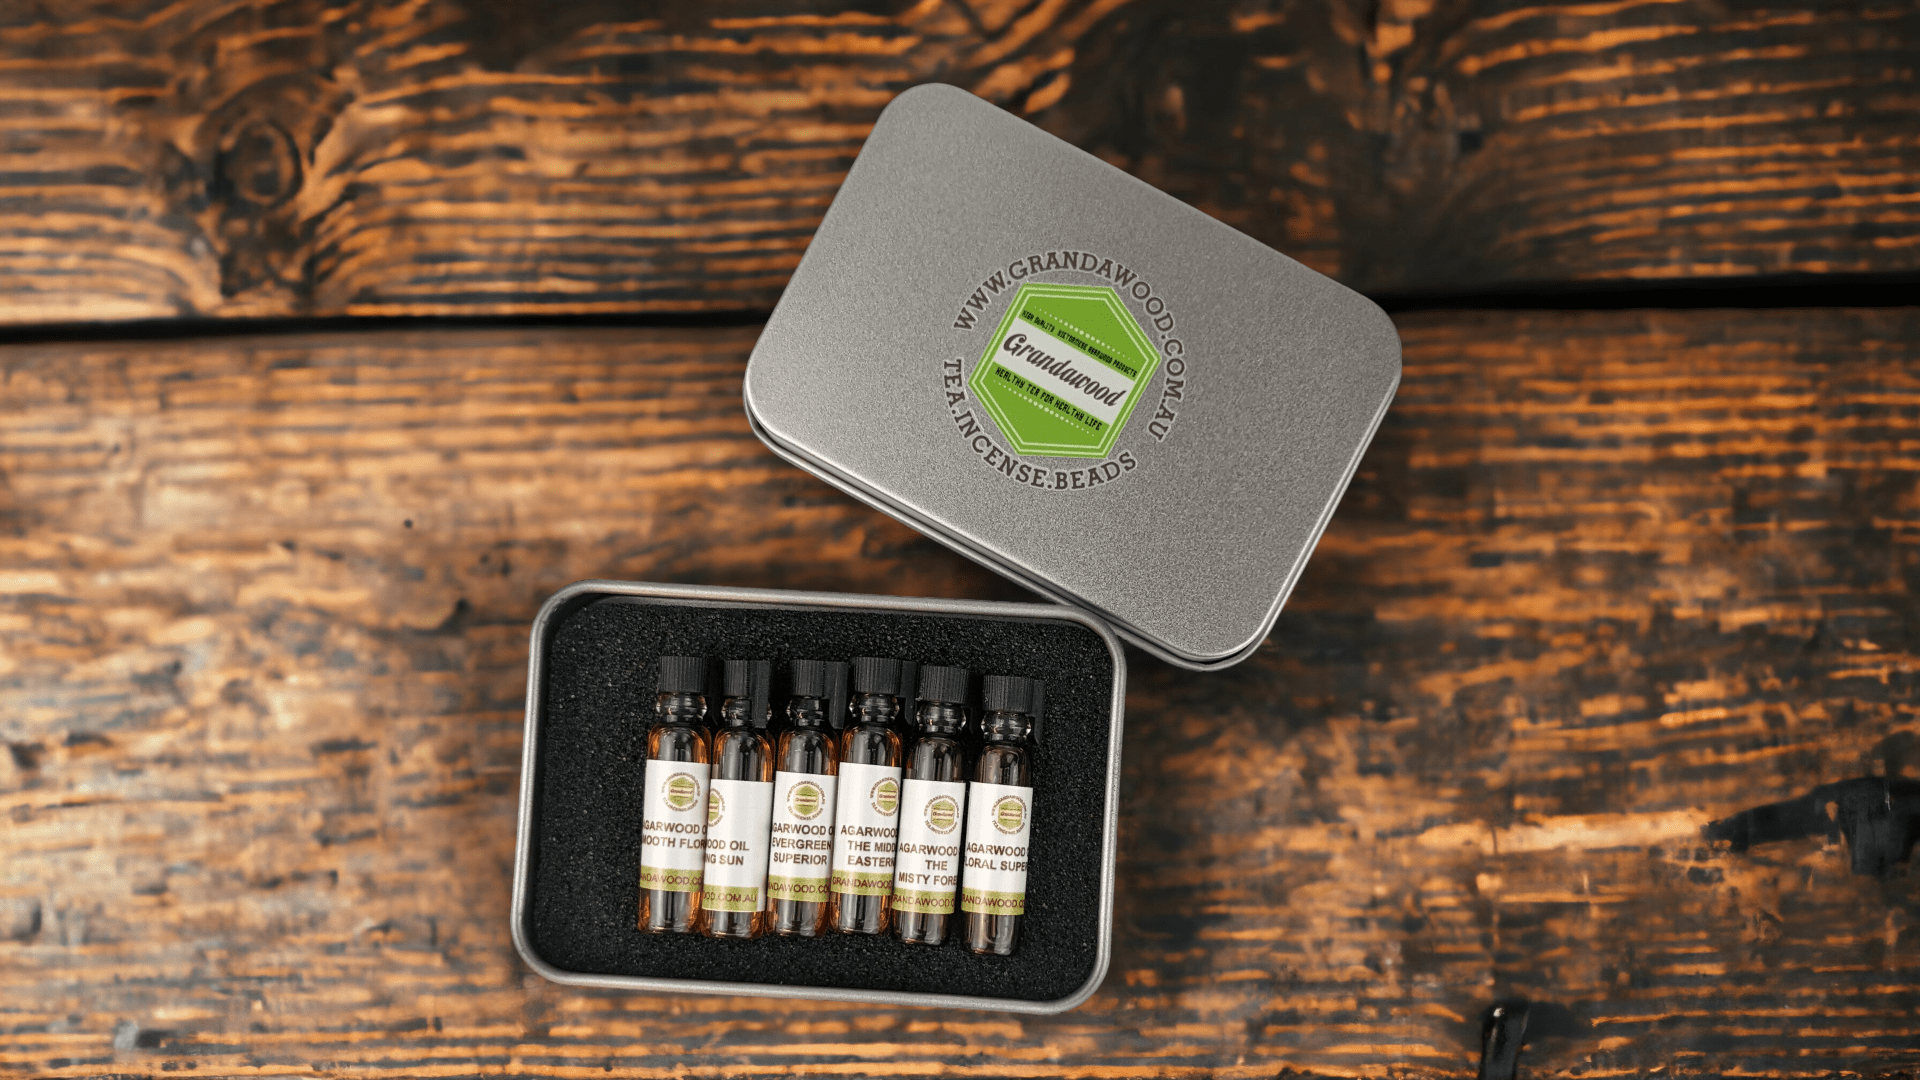 Agarwood (Oud) Essential Oil Sample Kit- To people who want to smell genuine Oud but can't get started - Cultivated Agarwood (Oud) Oil / 0.5ml